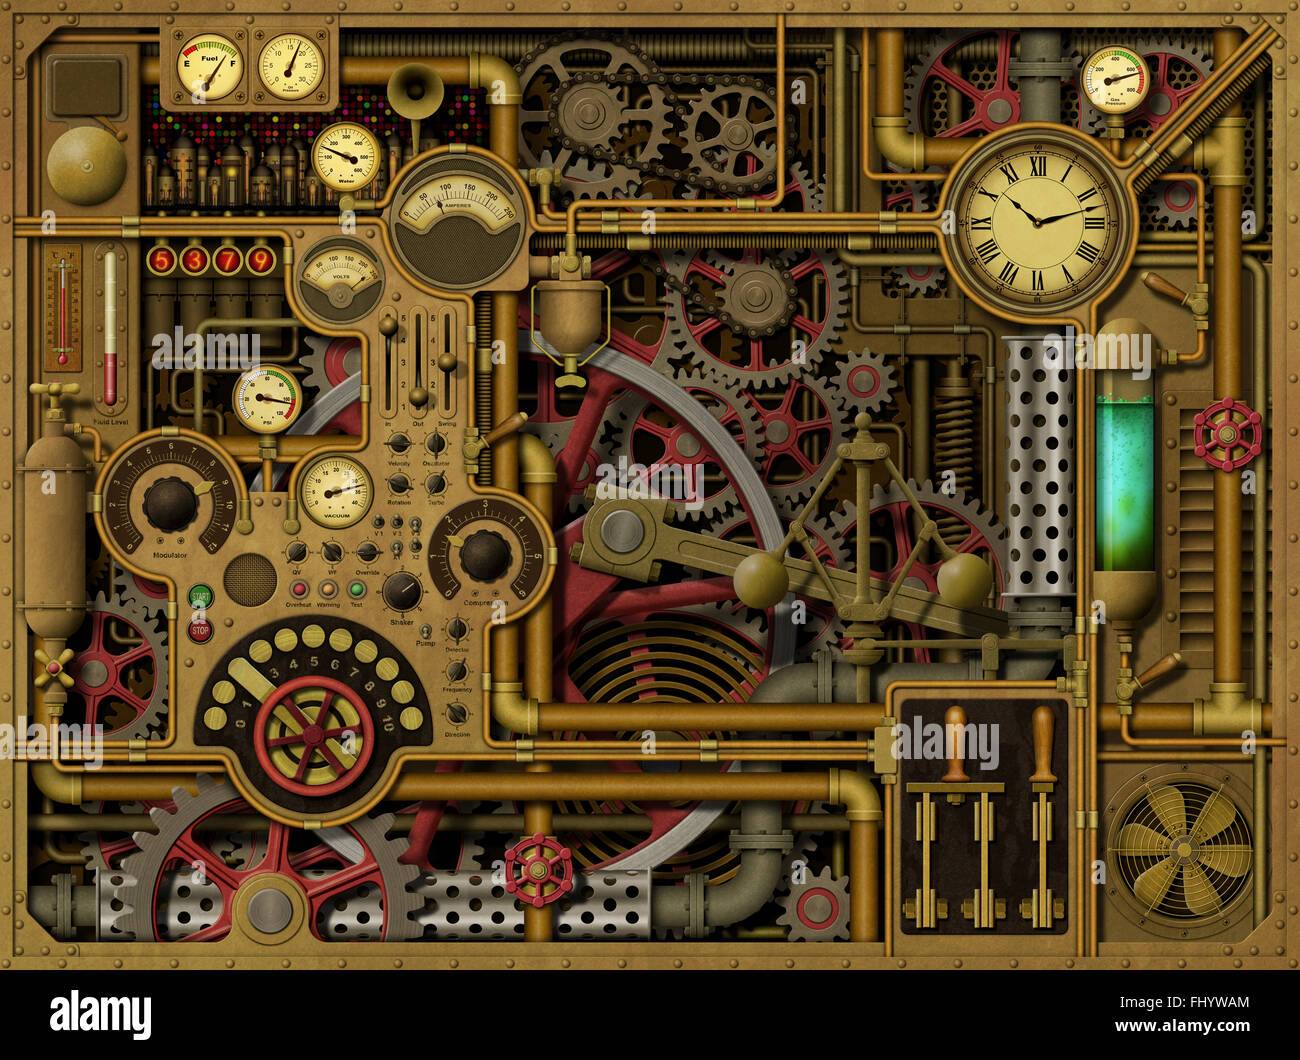 Steam punk man stock image. Image of background, industrial - 108121197